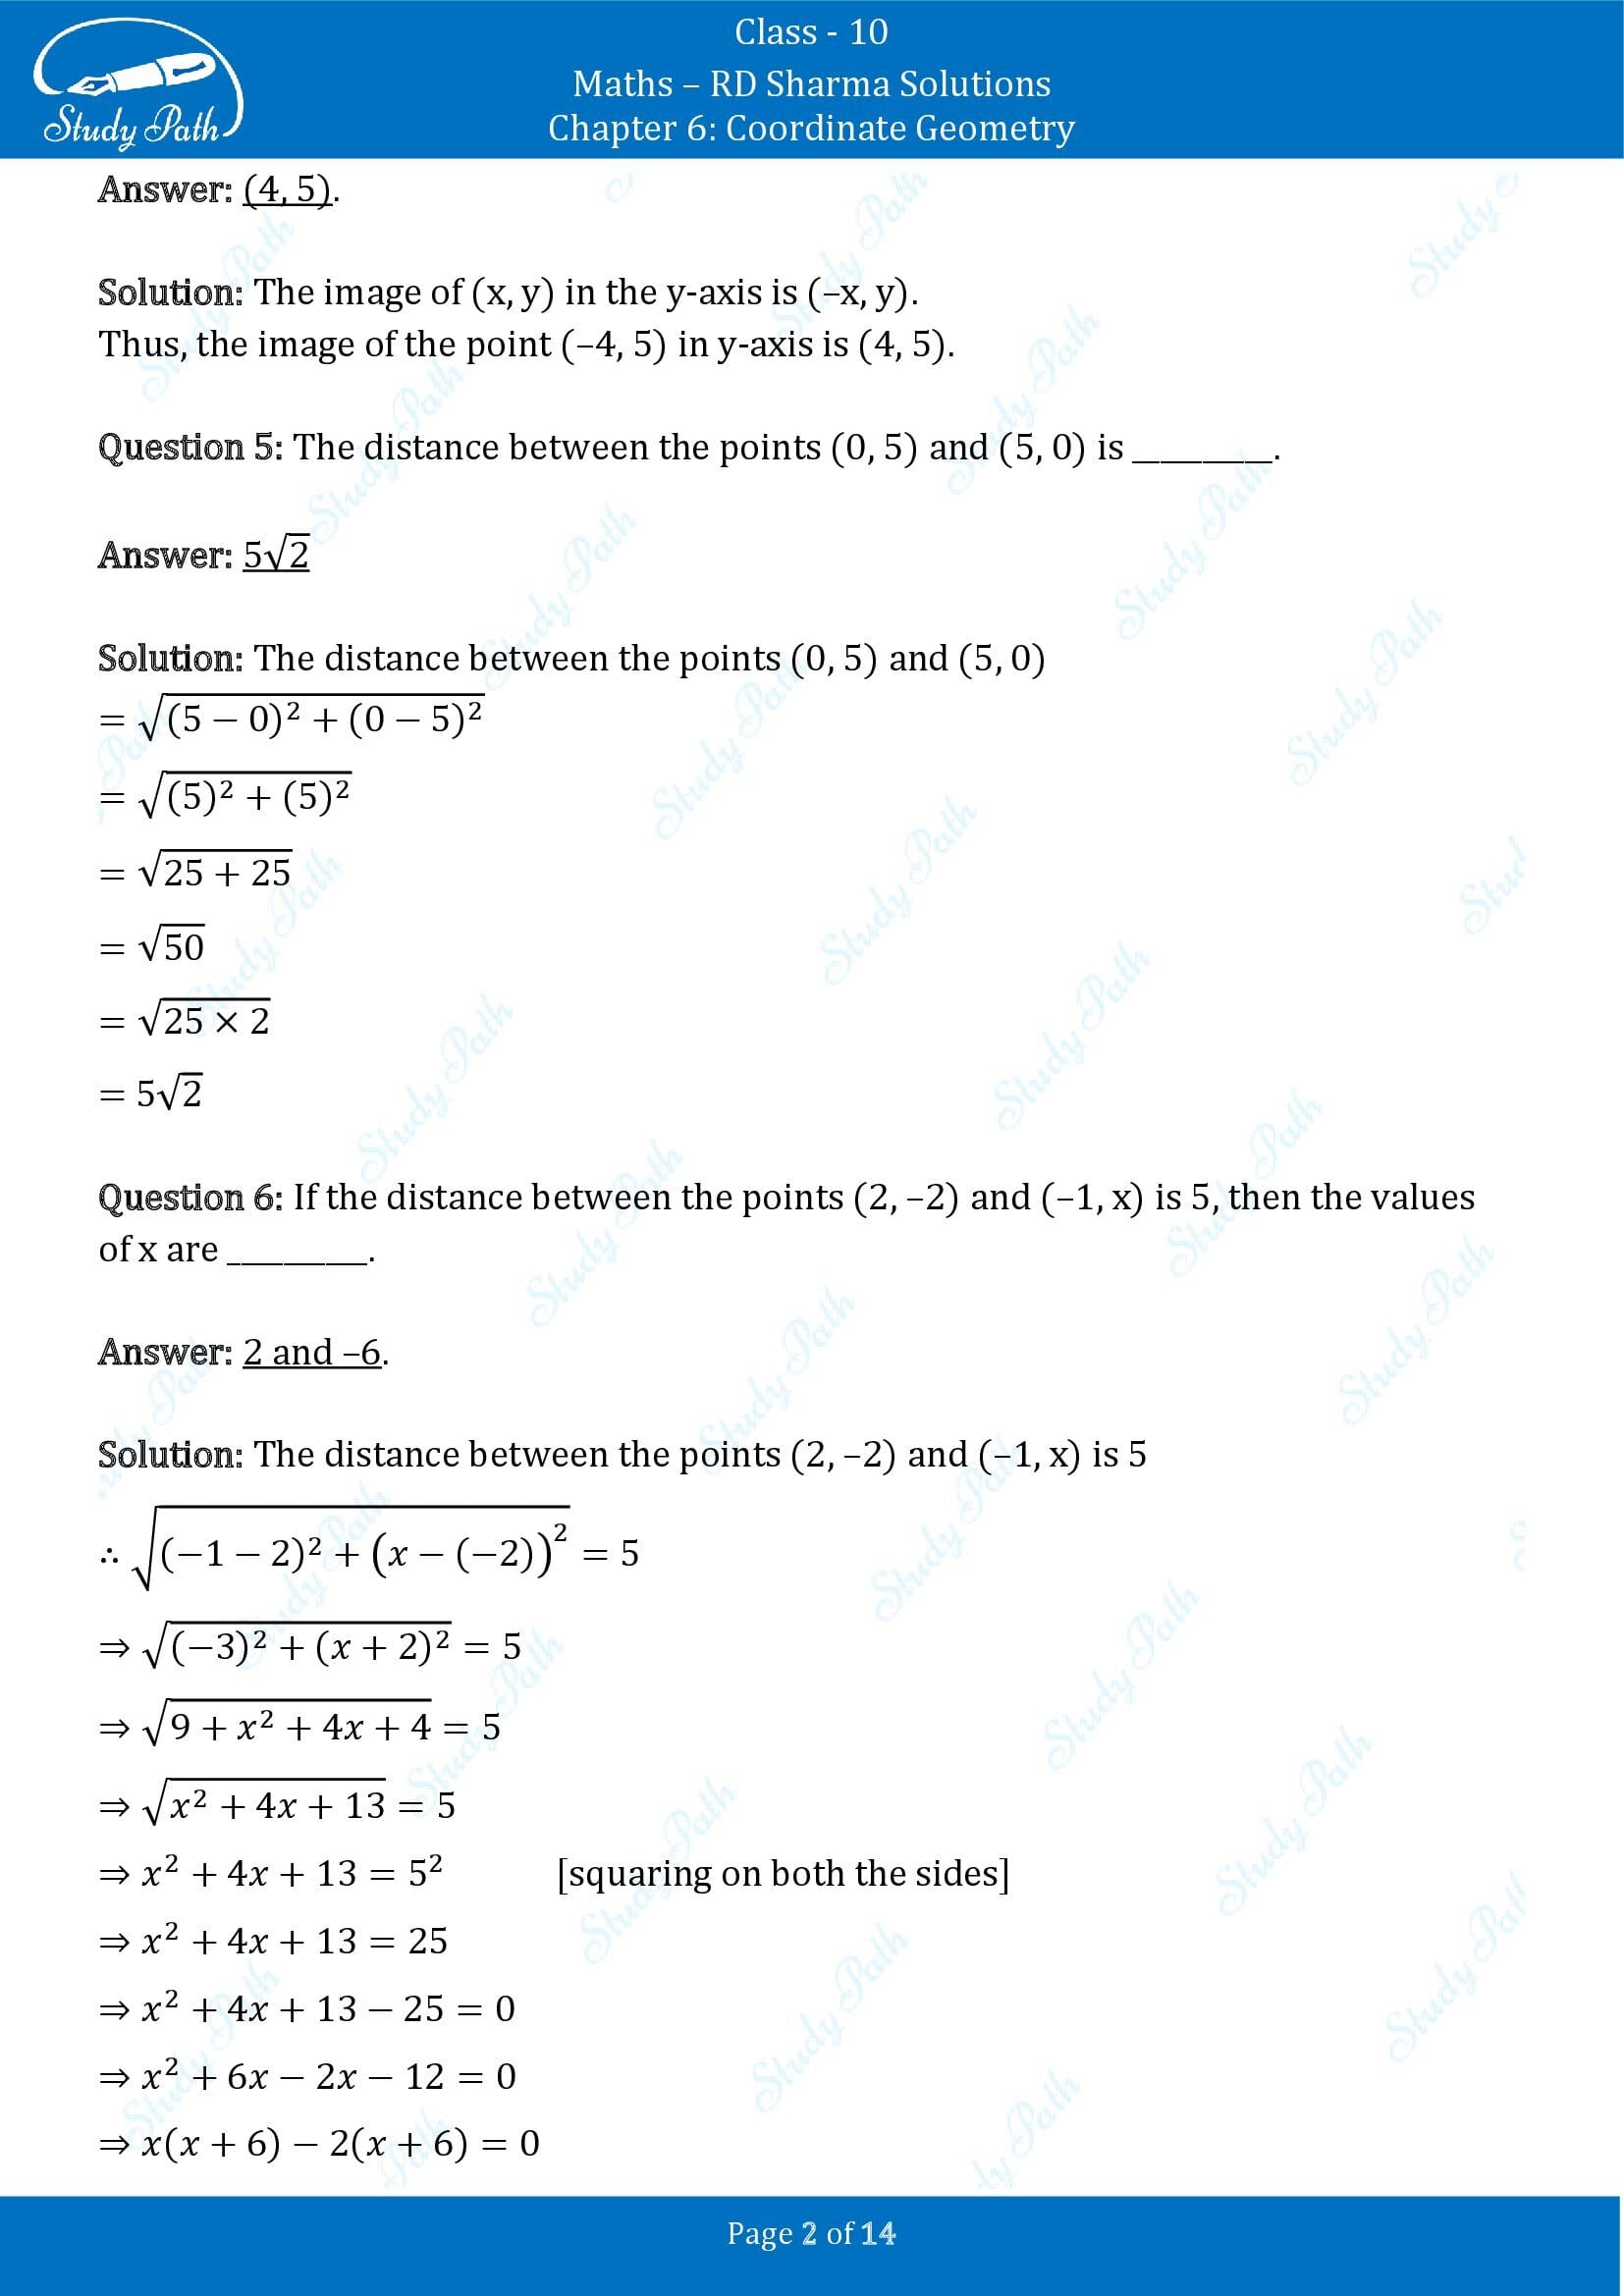 RD Sharma Solutions Class 10 Chapter 6 Coordinate Geometry Fill in the Blank Type Questions FBQs 00002